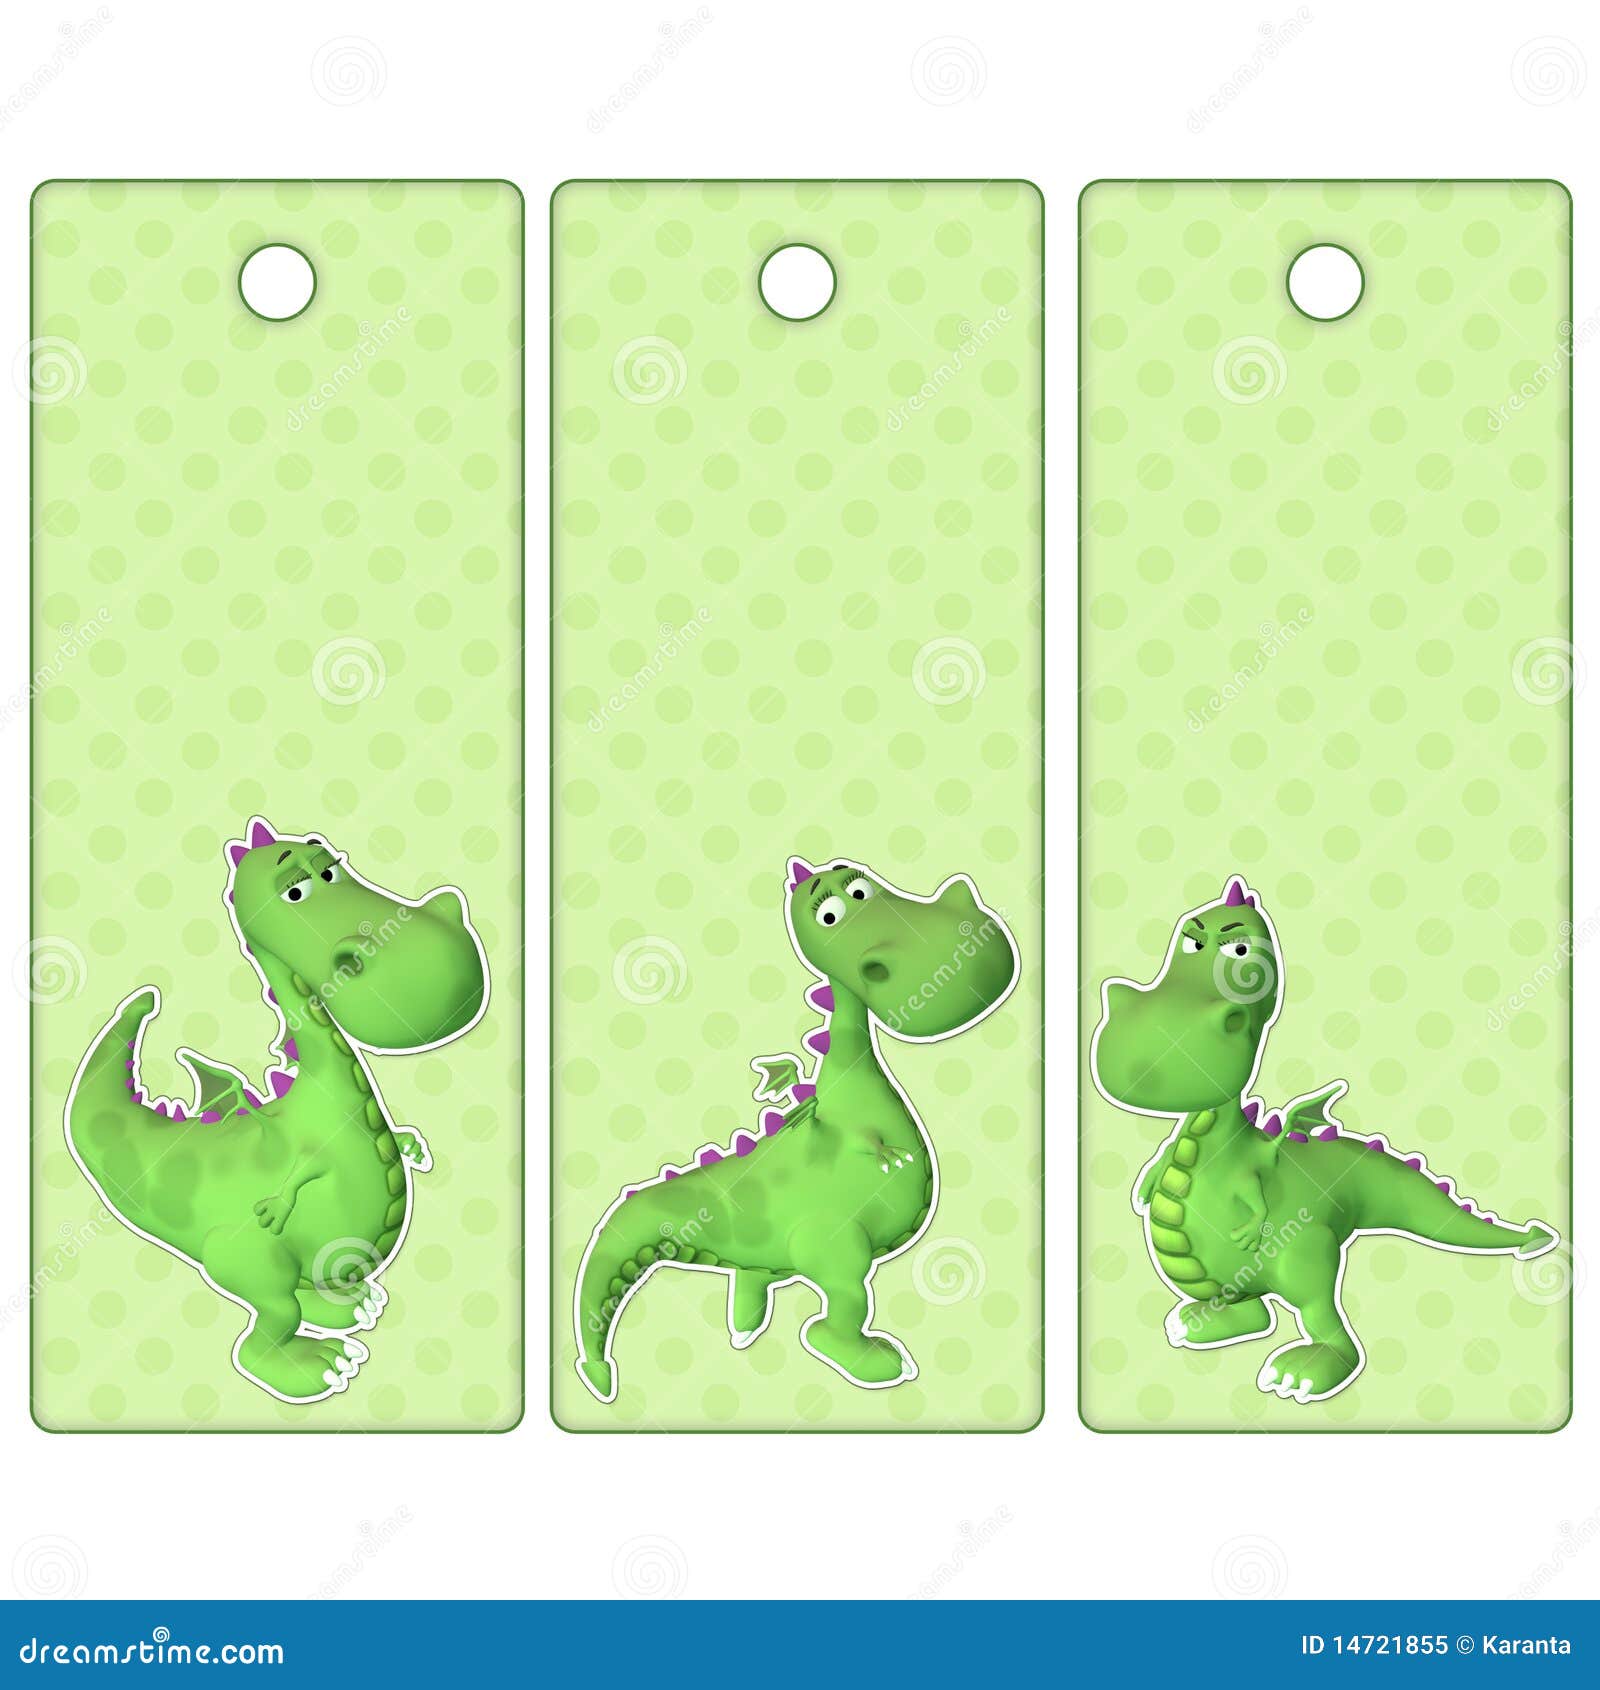 cute tags or bookmarks with a green dragon stock illustration illustration of bookmark copy 14721855